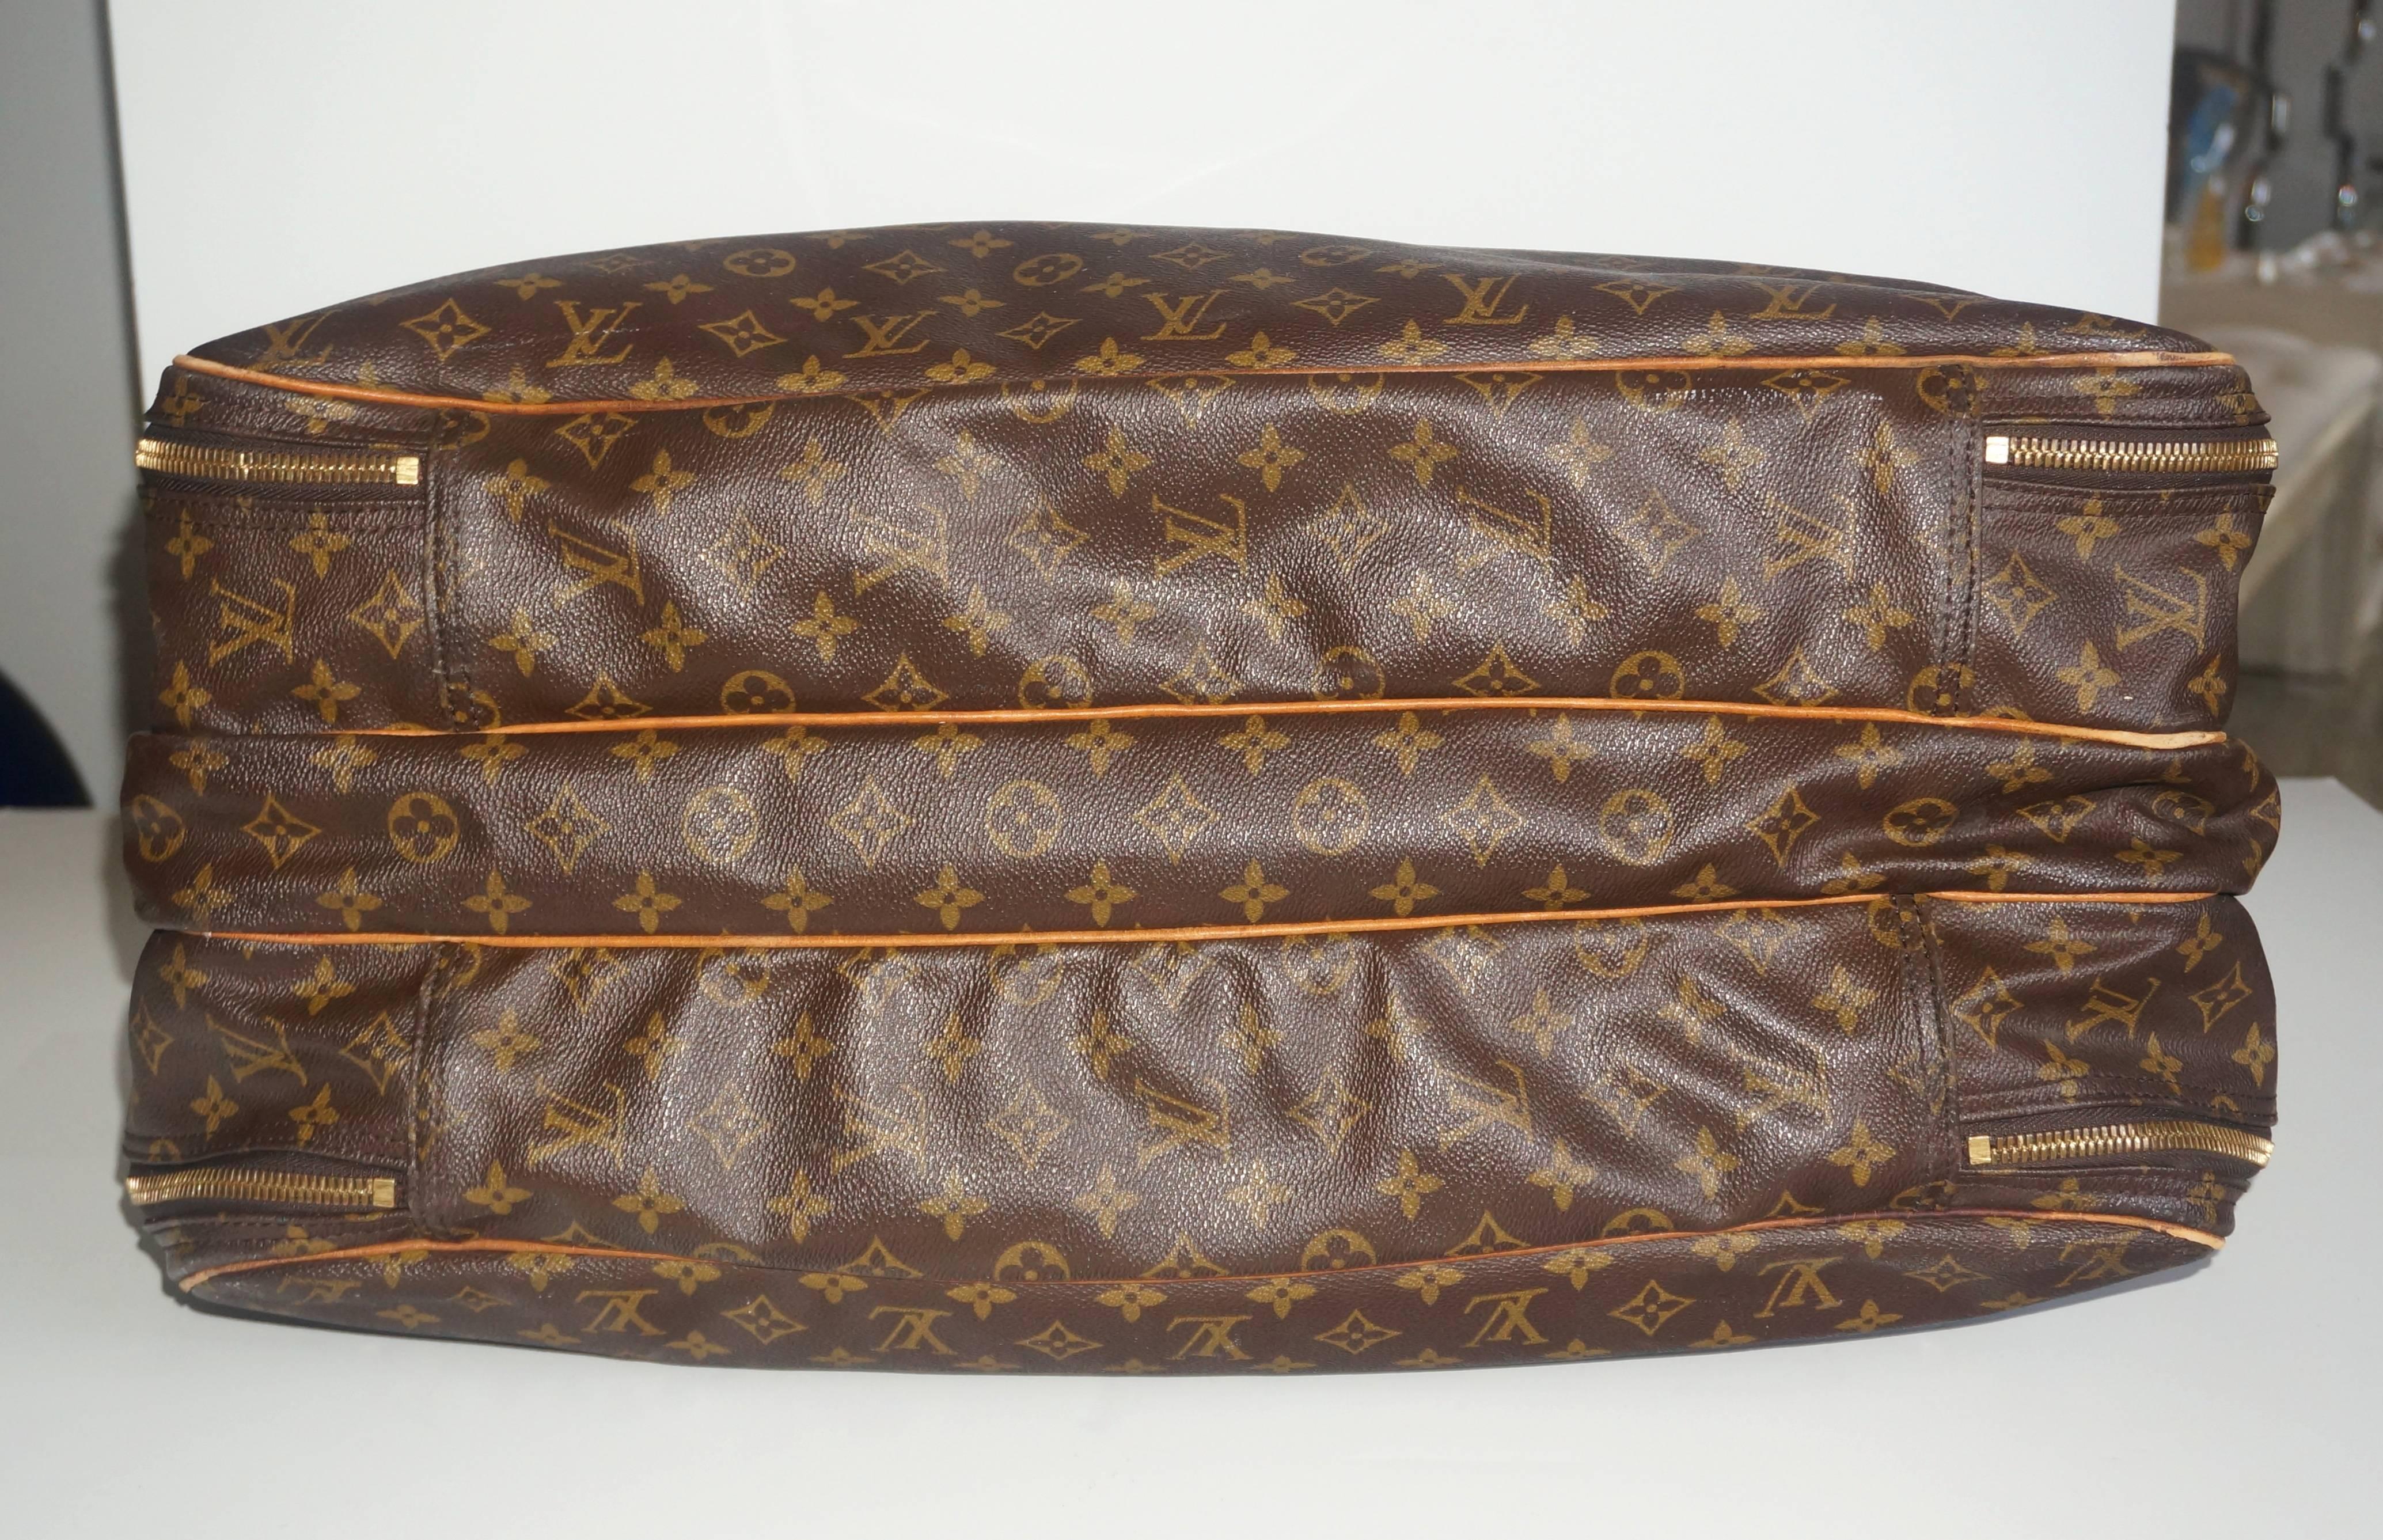 20th Century  Louis Vuitton Weekender Bag with Iconic LV Monogram and Leather Trim